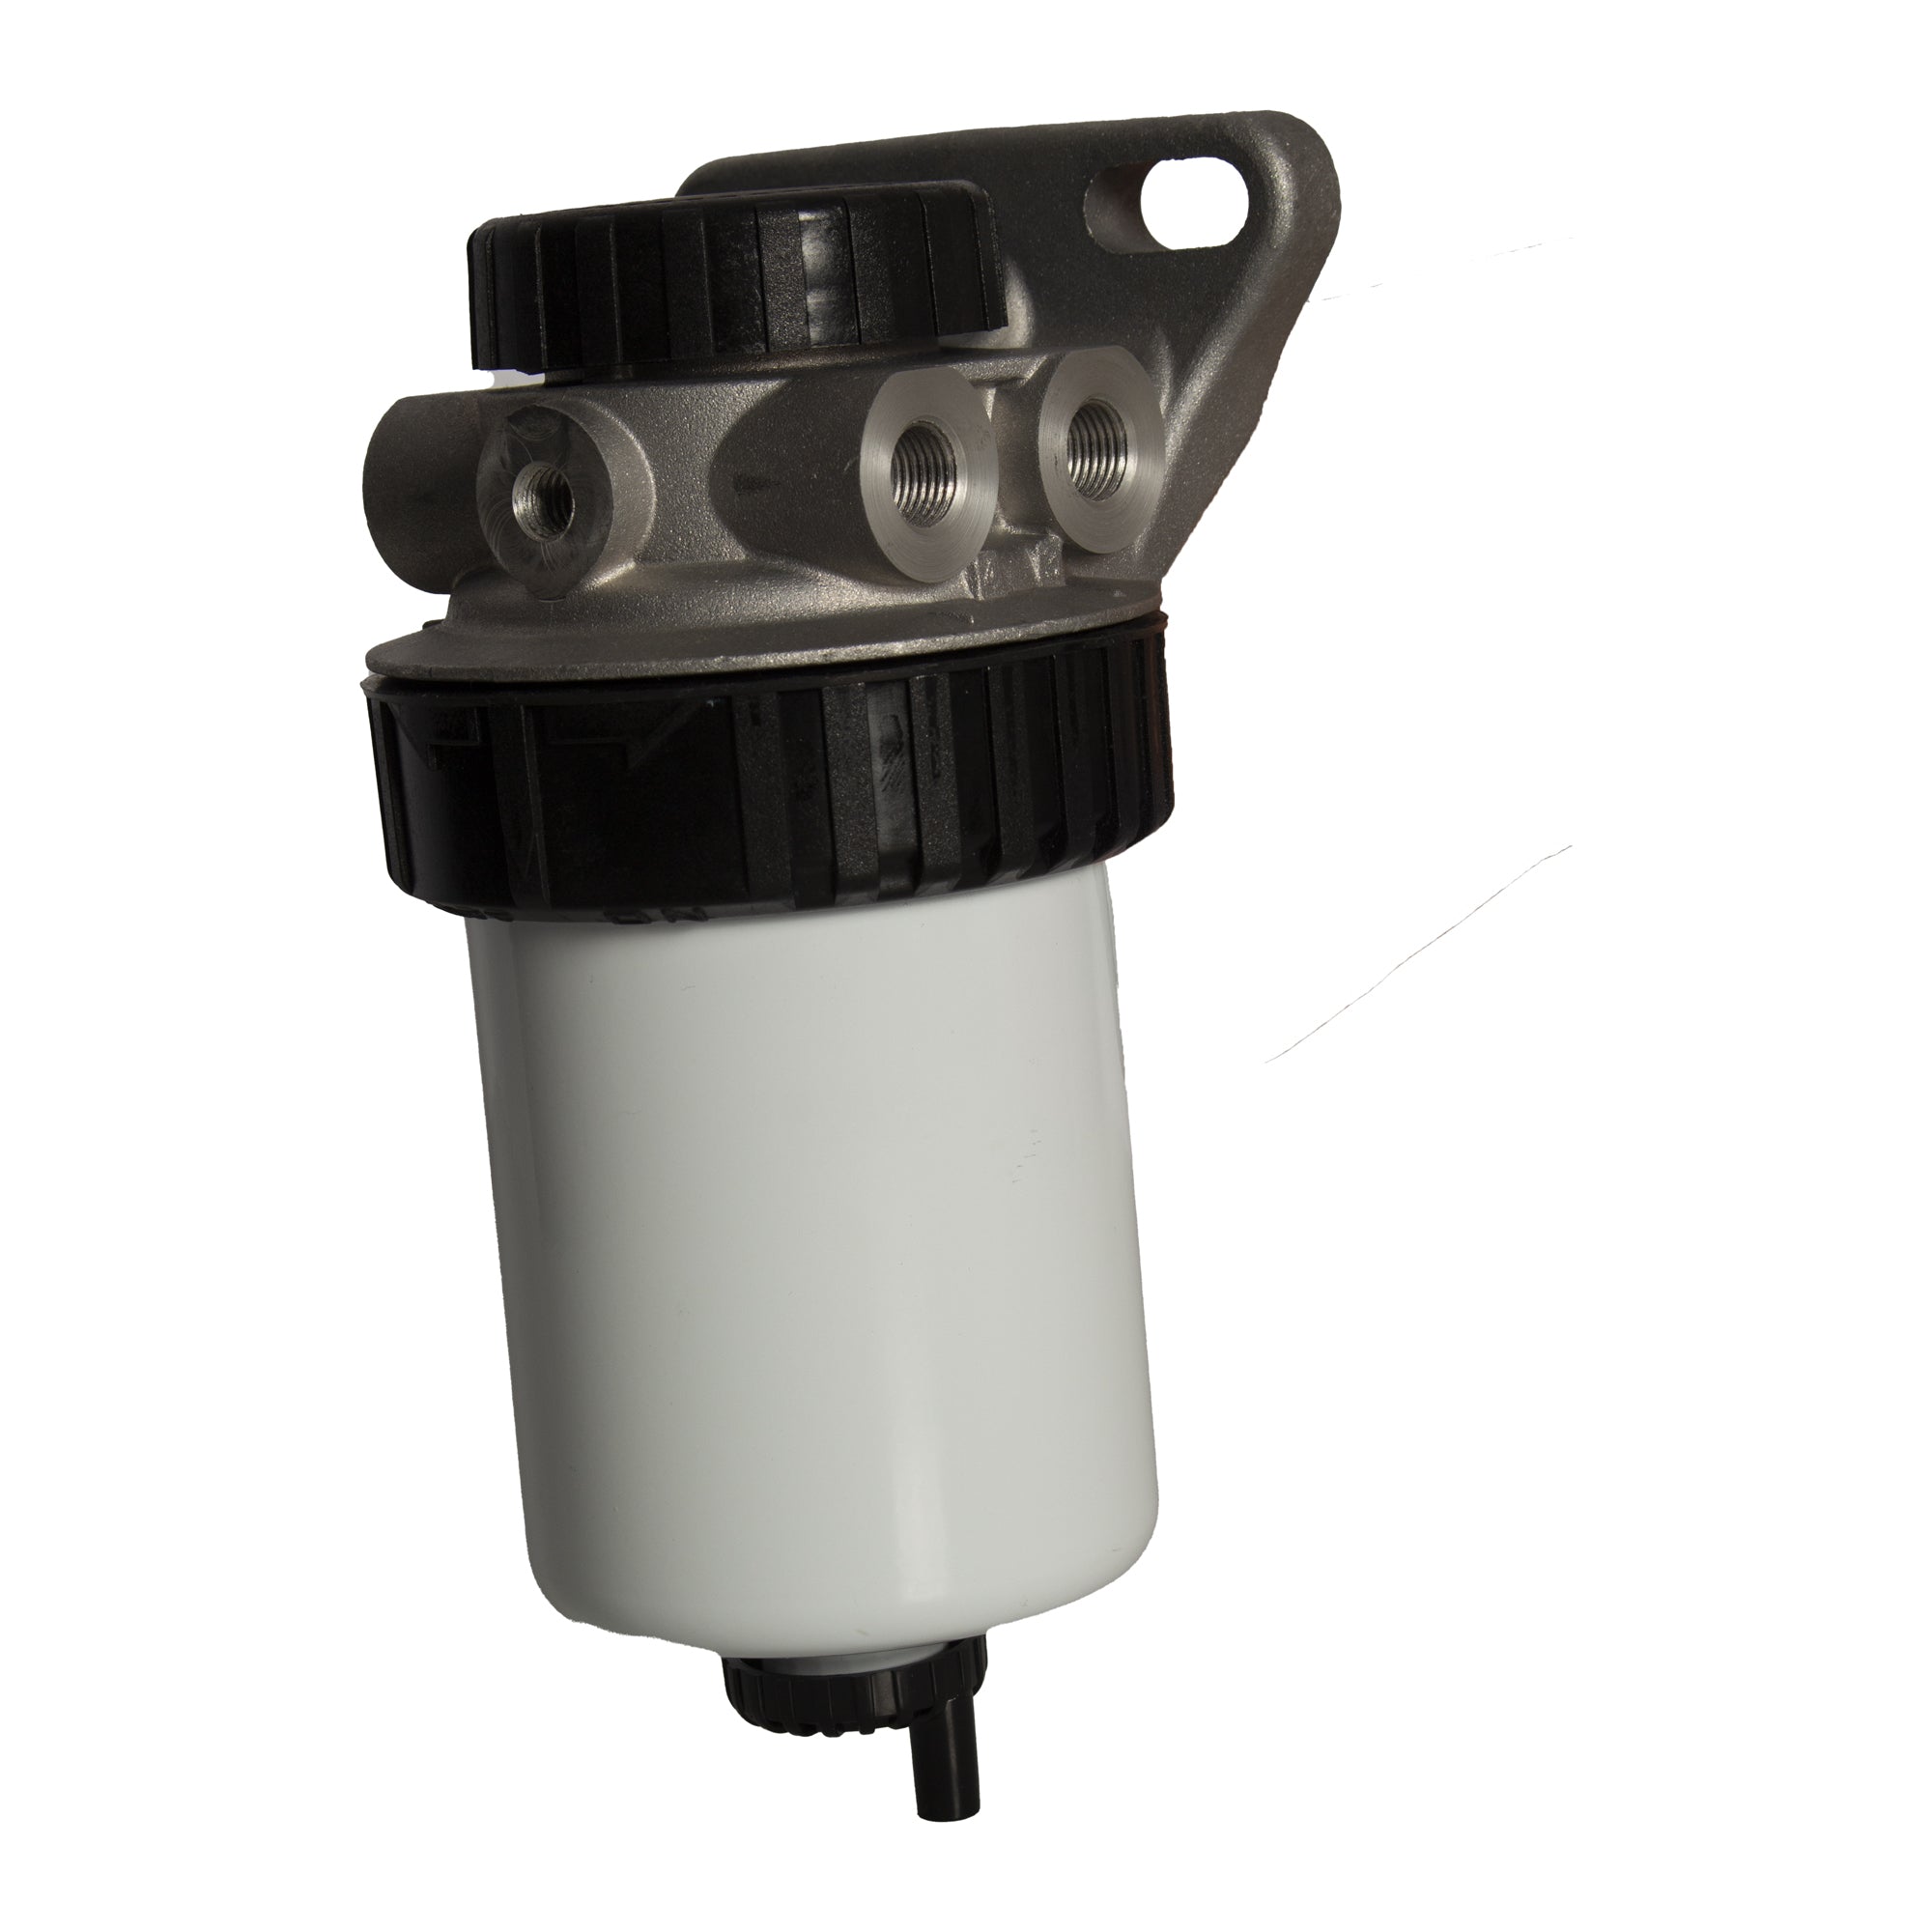 Electrical Fuel Pump Replacement for Caterpillar 138-3096